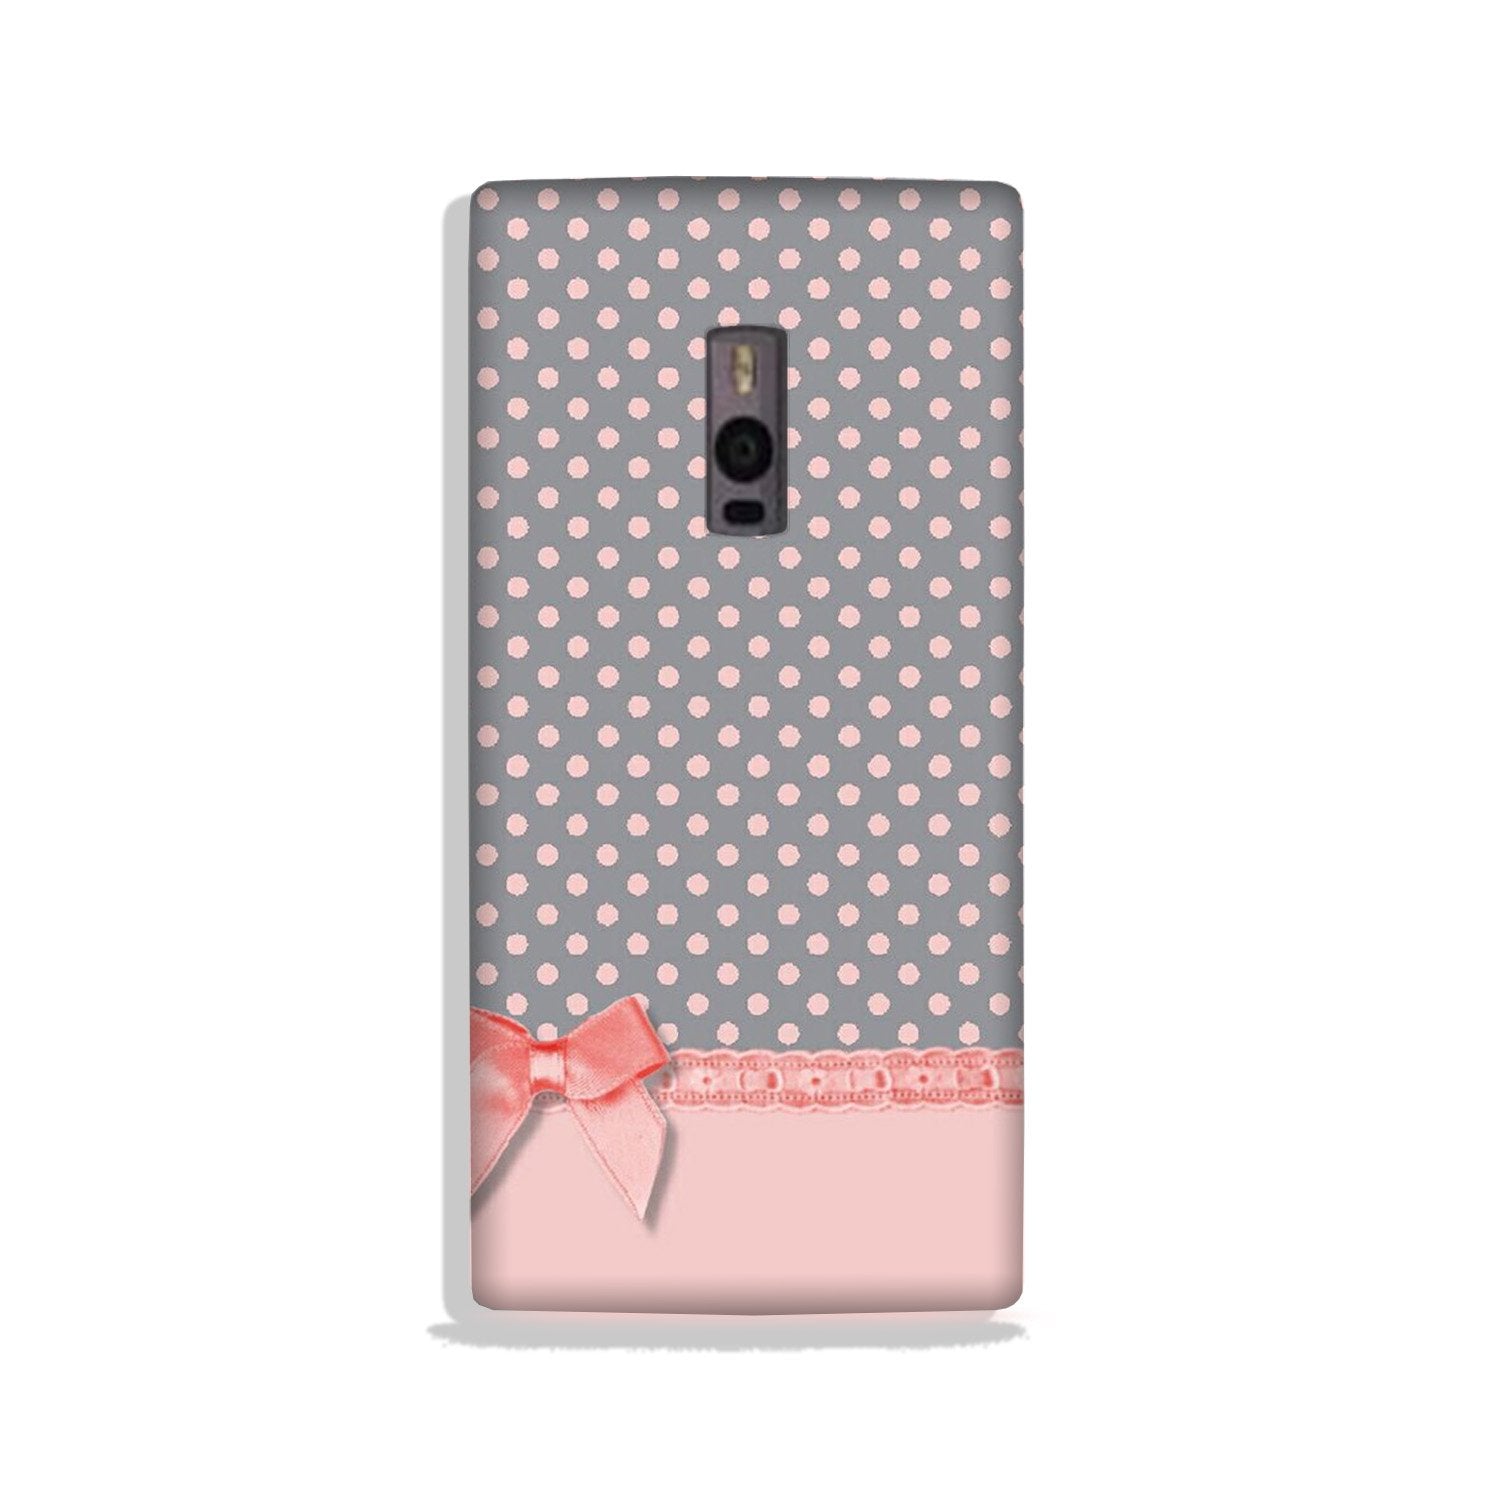 Gift Wrap2 Case for OnePlus 2